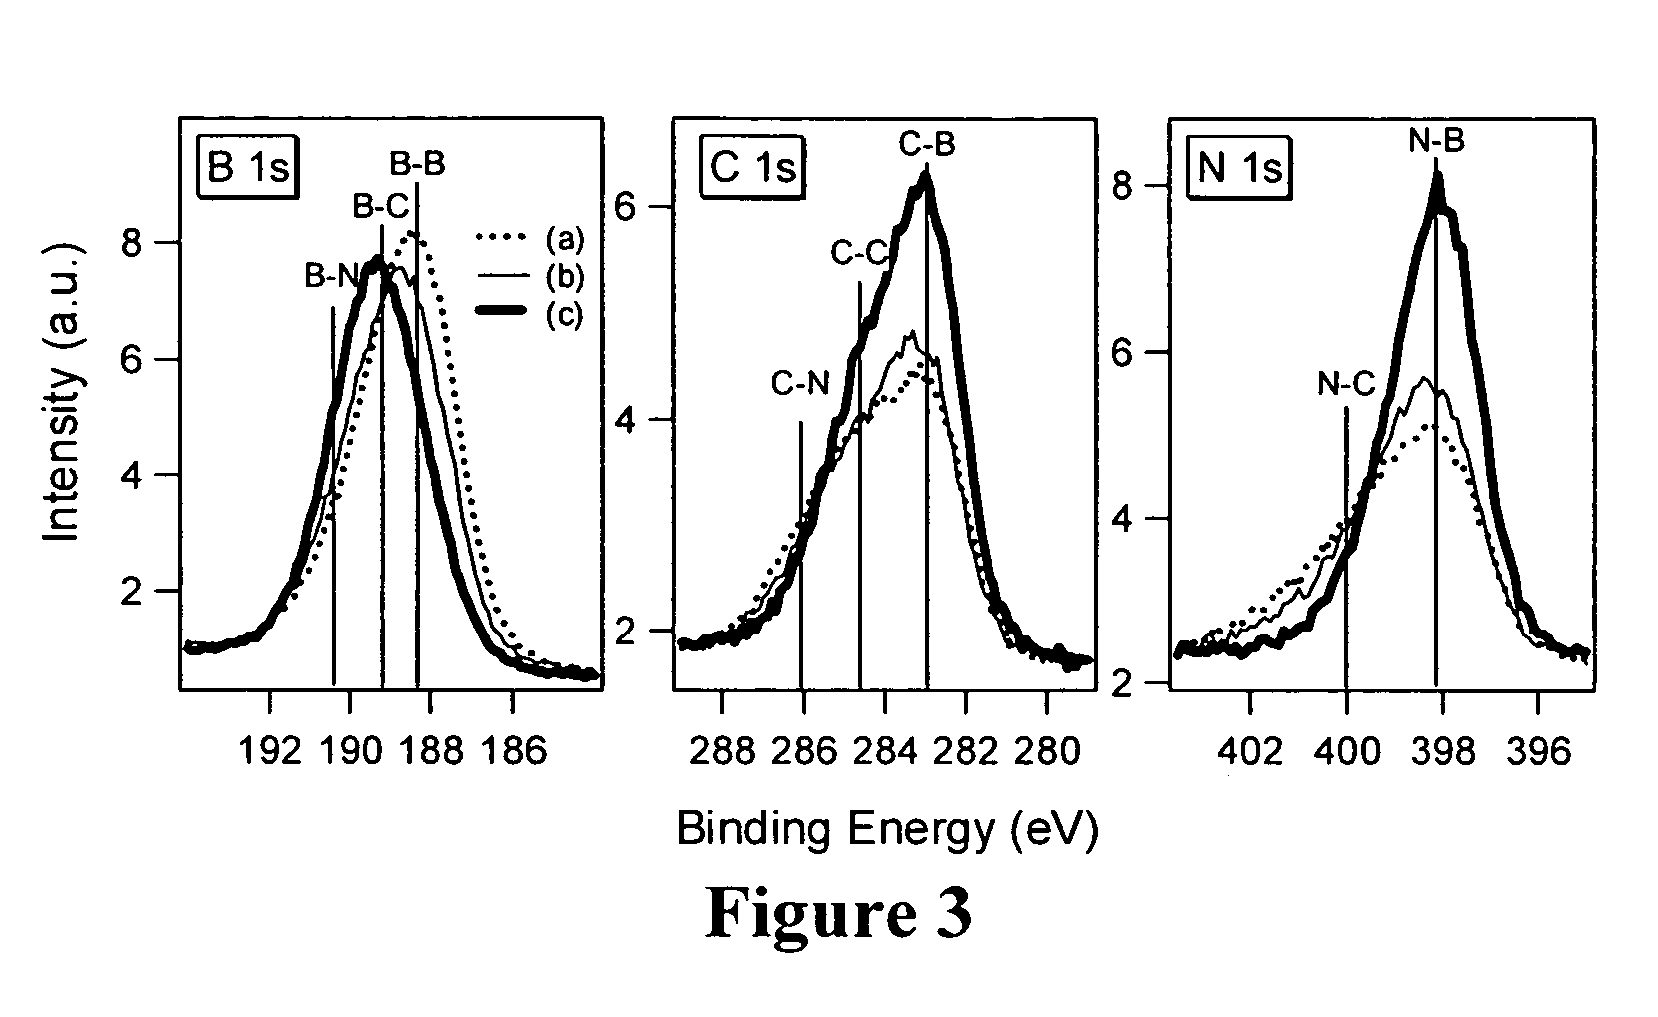 Methods of forming boron carbo-nitride layers for integrated circuit devices